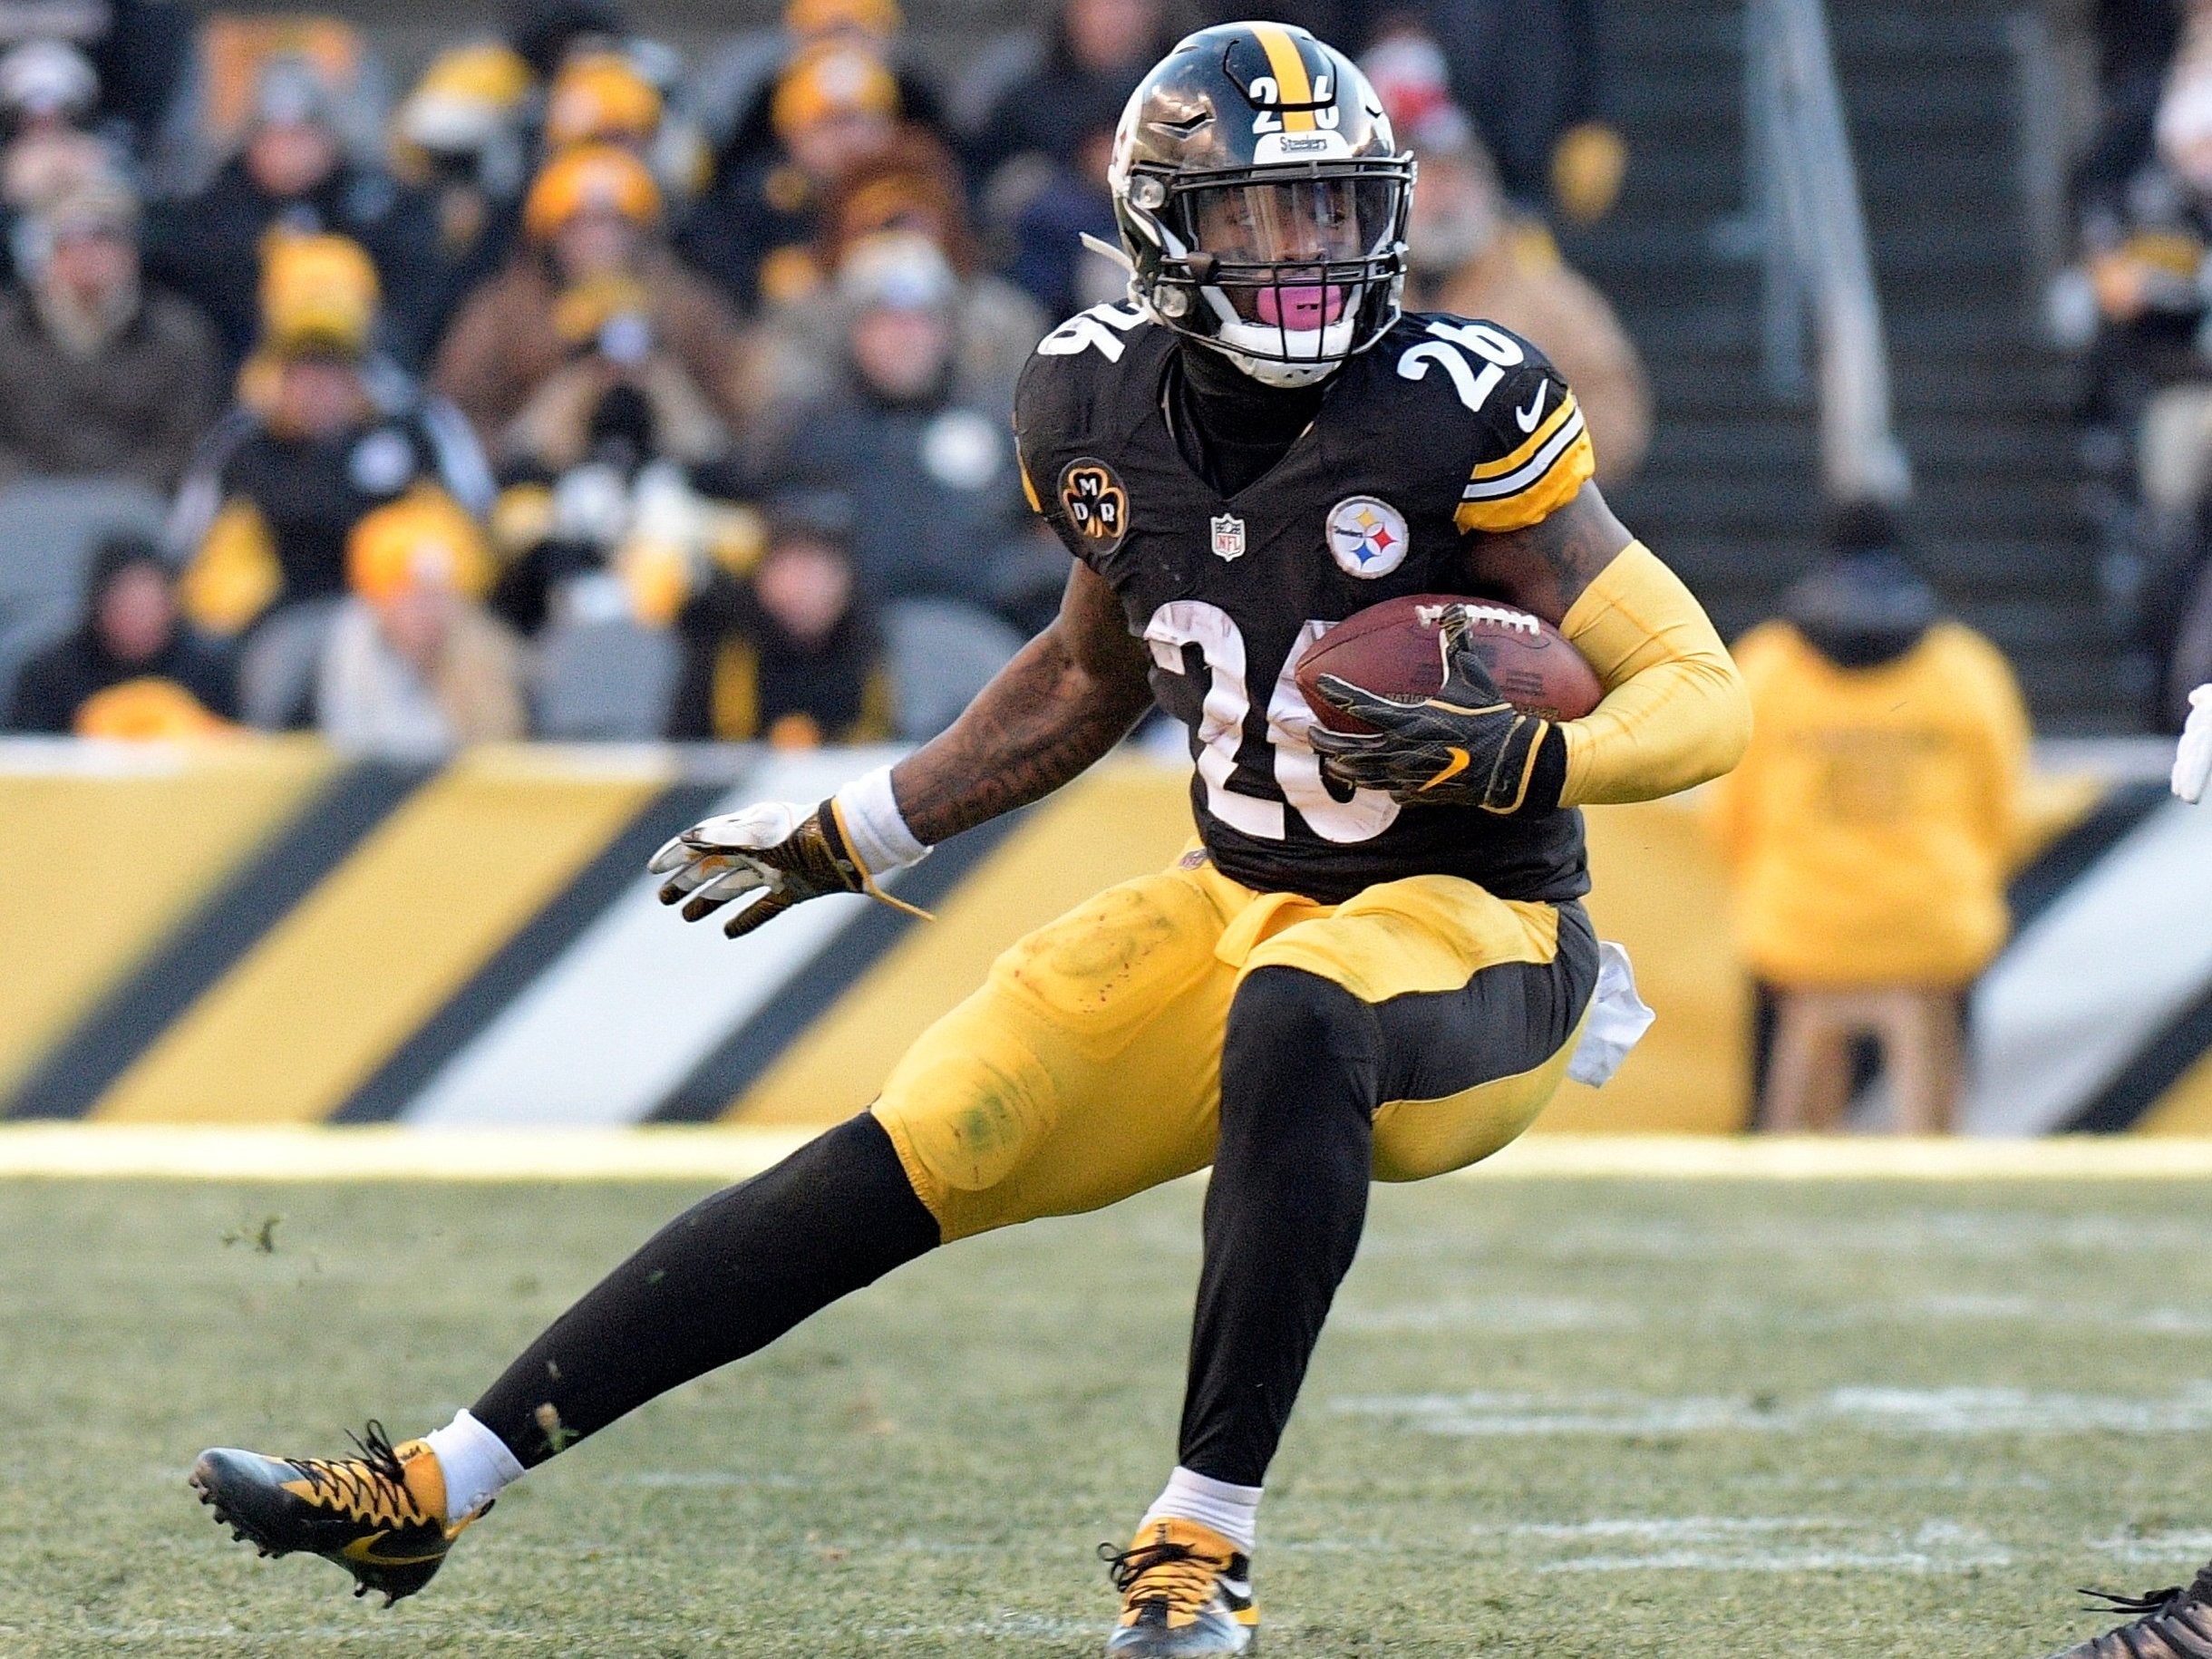 Le'Veon Bell has left the Pittsburgh Steelers for the New York Jets